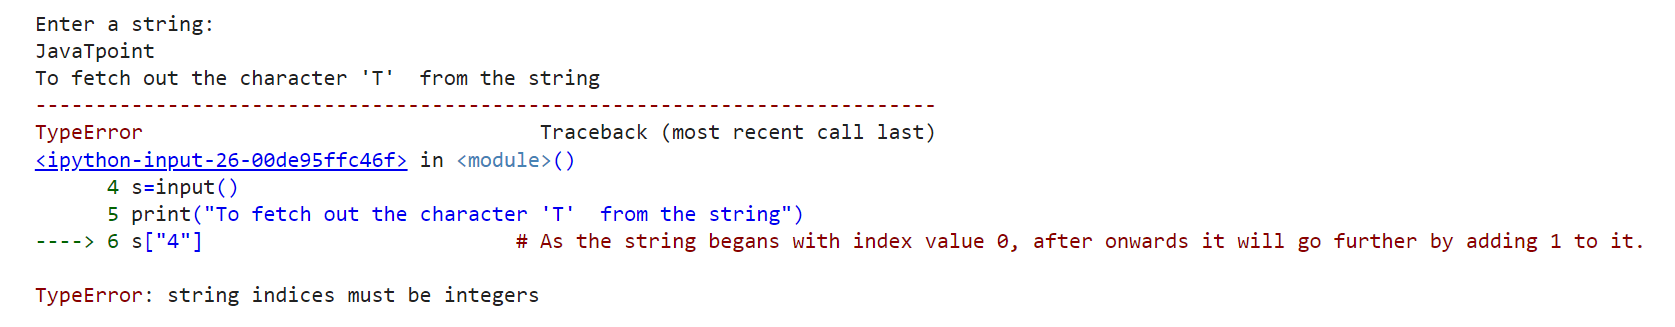 TypeError string indices must be an integer